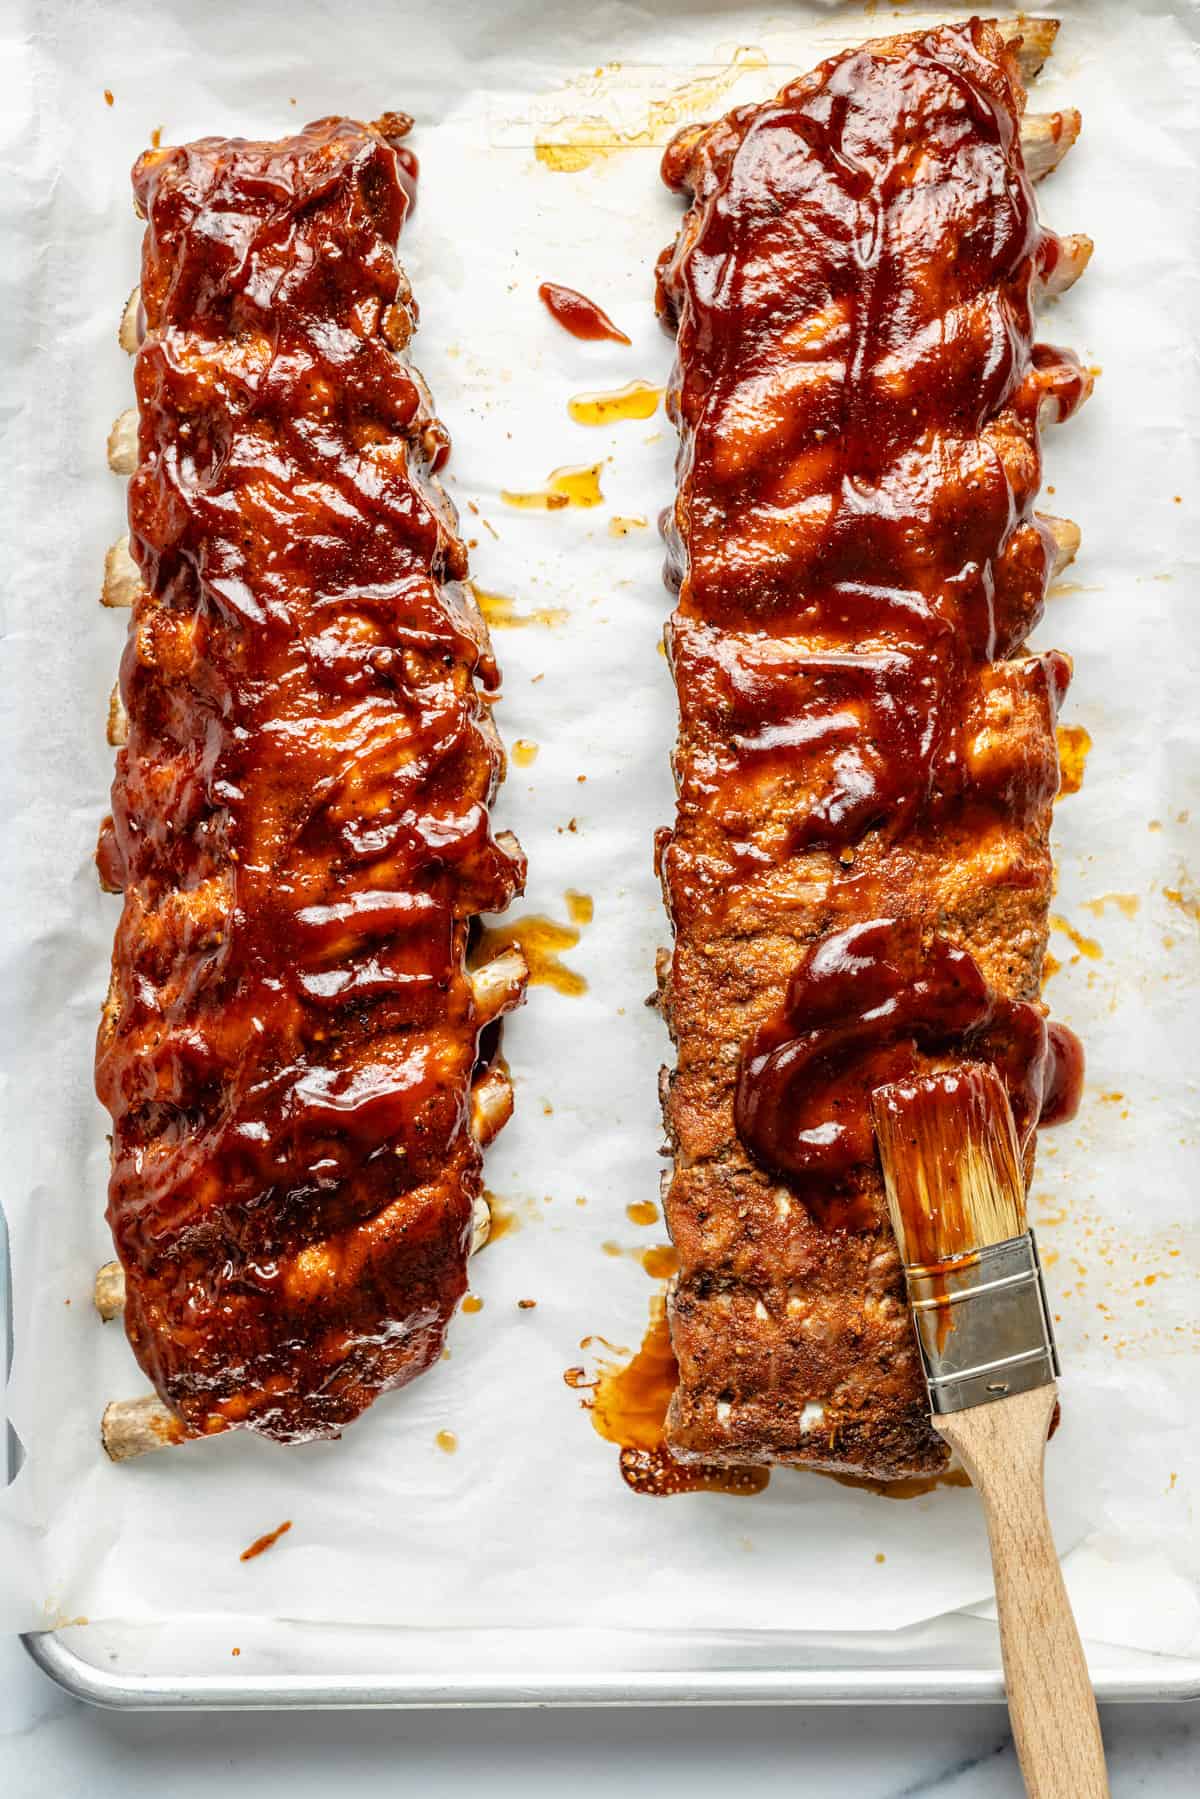 barbecue sauce being spread on ribs